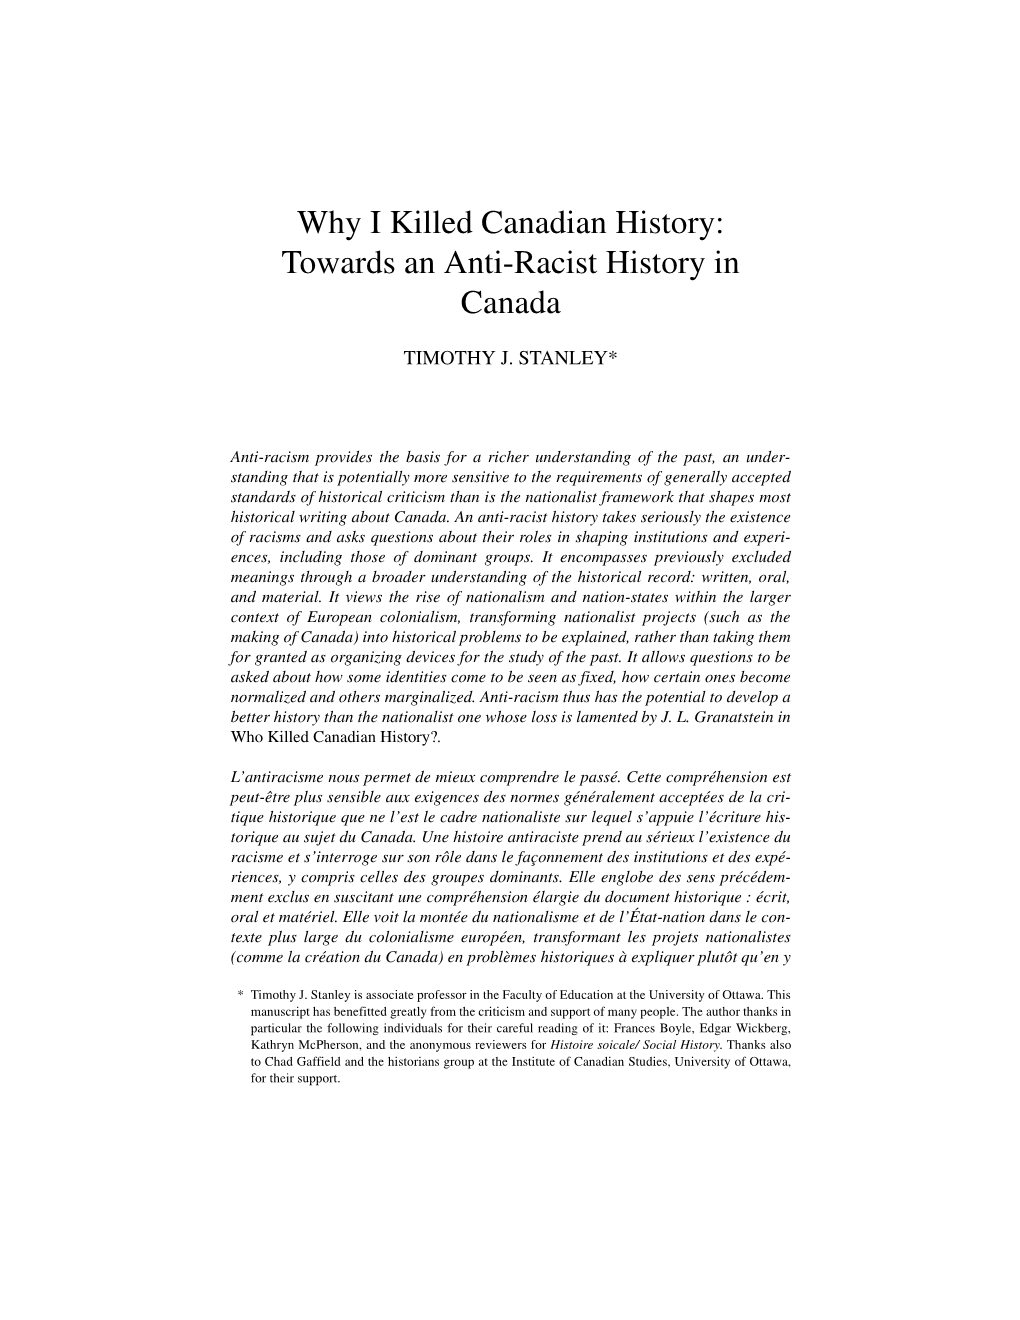 Towards an Anti4racist History in Canada